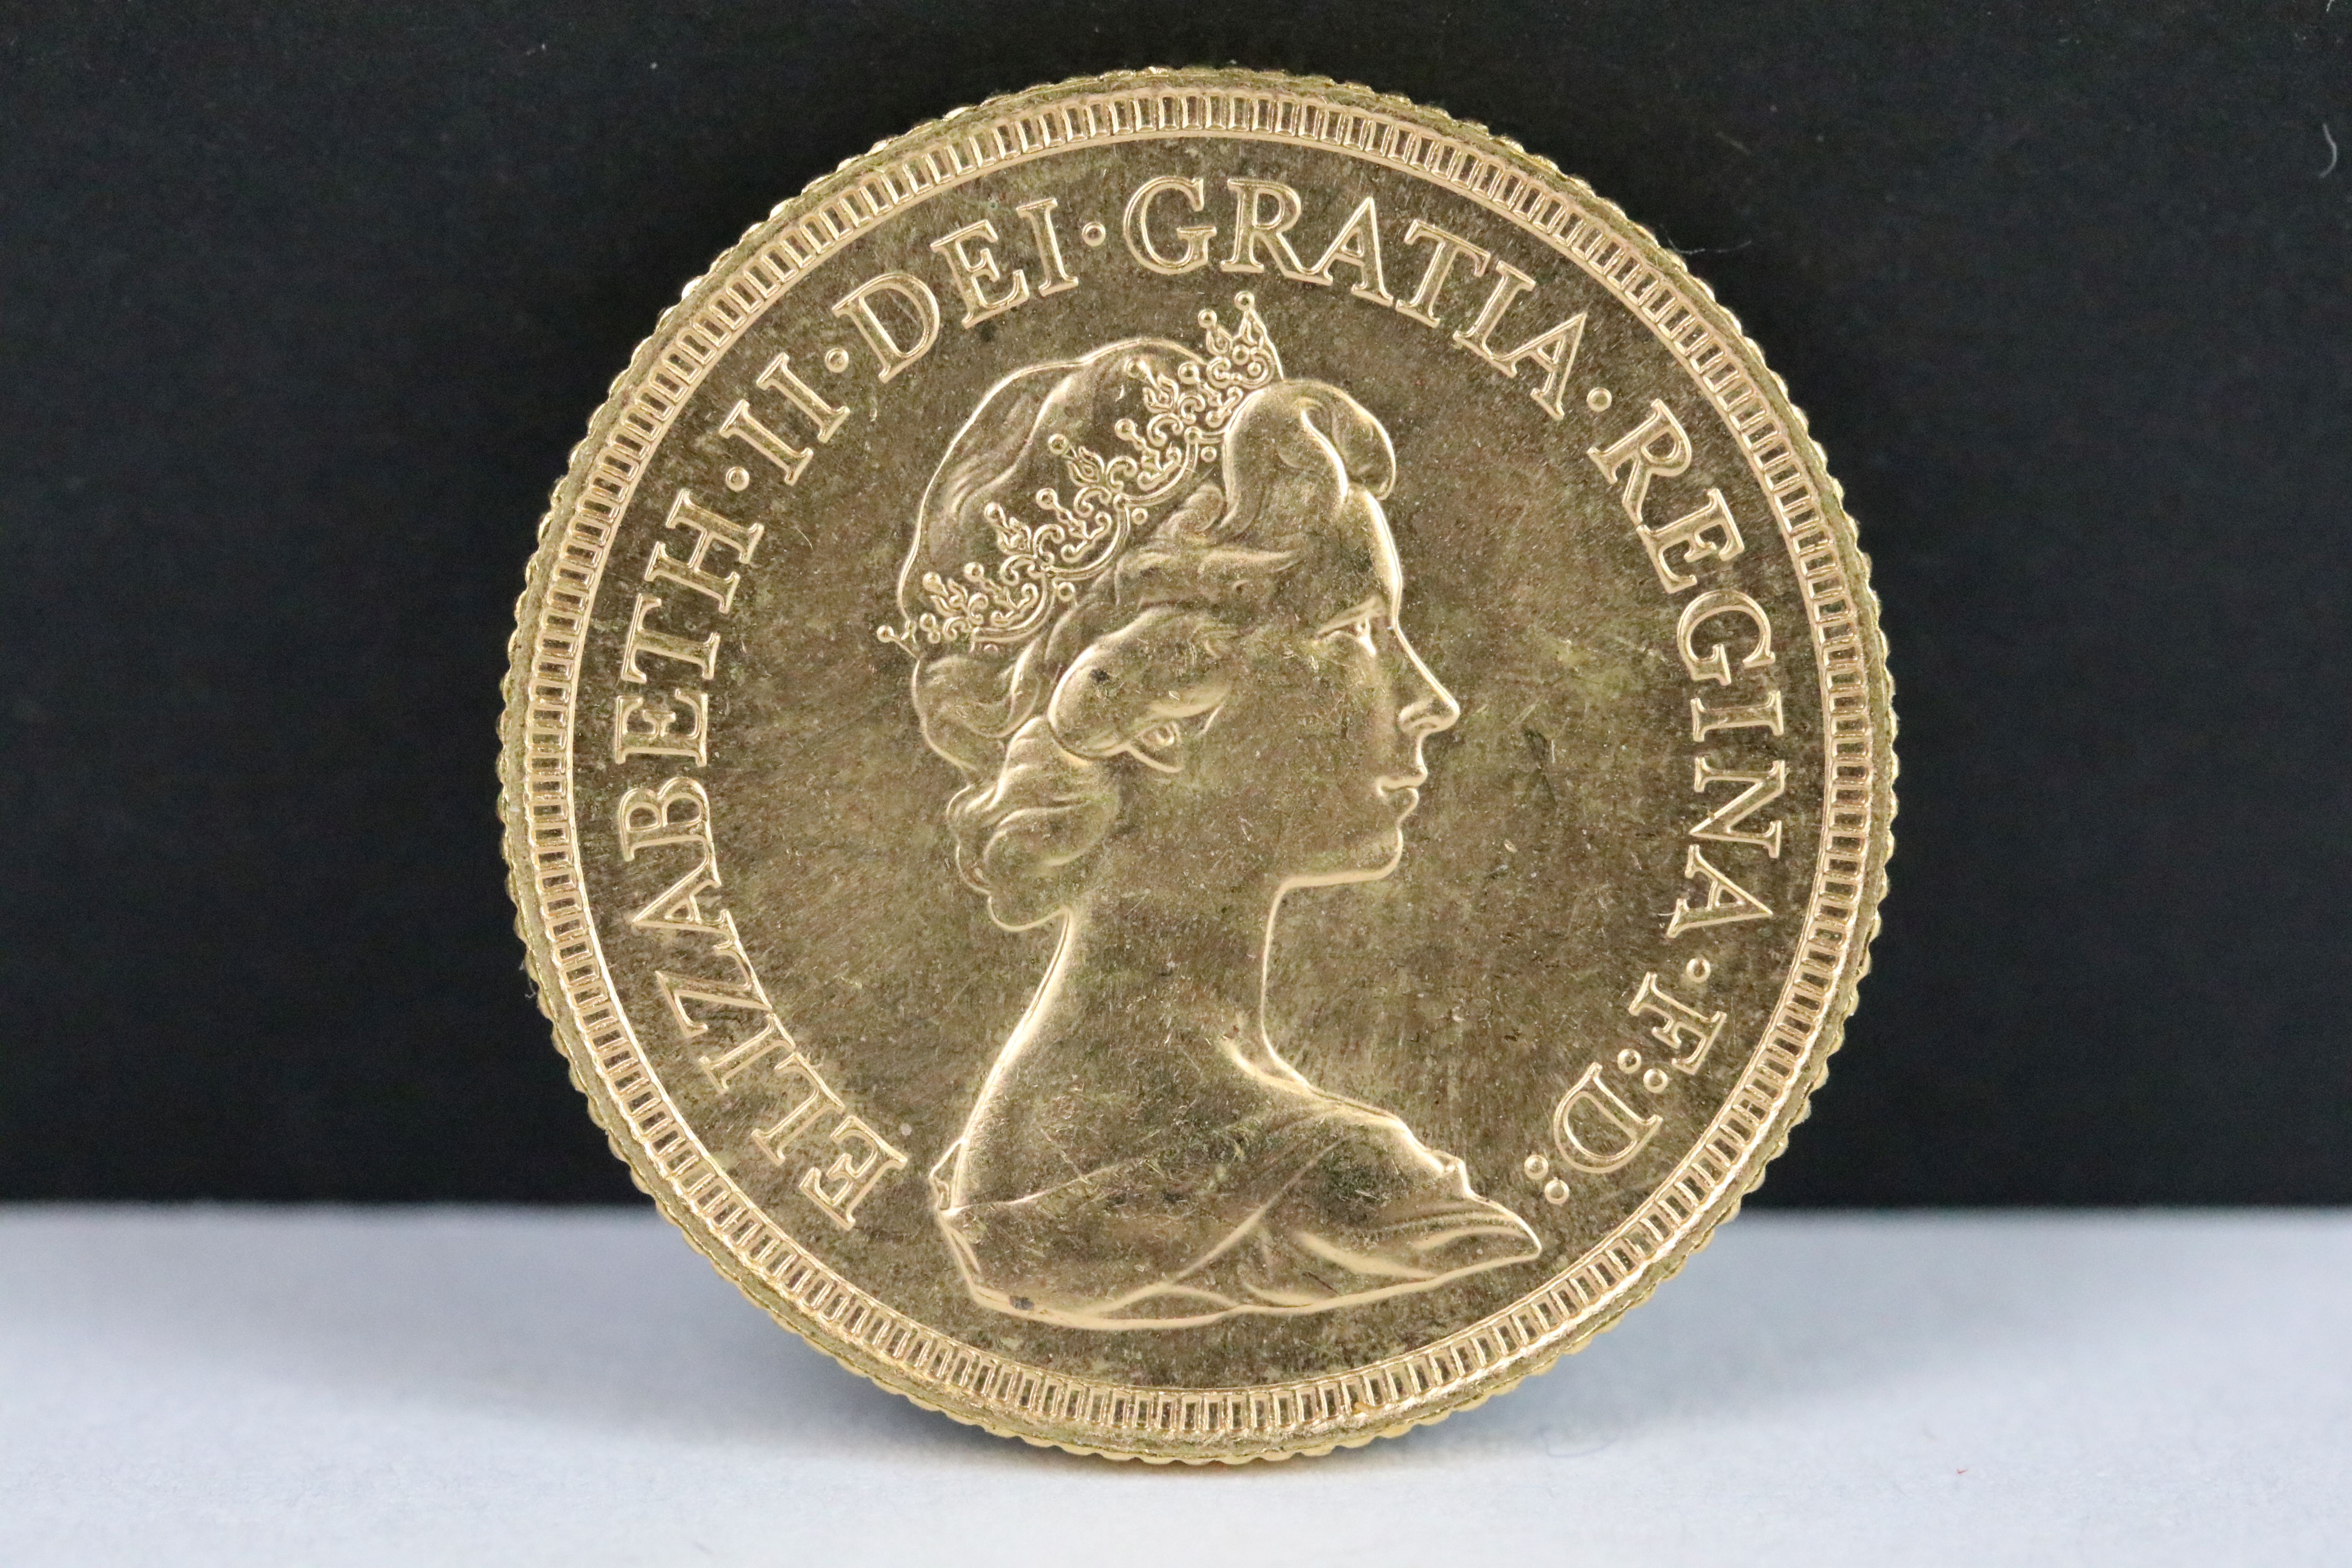 A British Queen Elizabeth II 1981 gold full sovereign coin. - Image 2 of 3